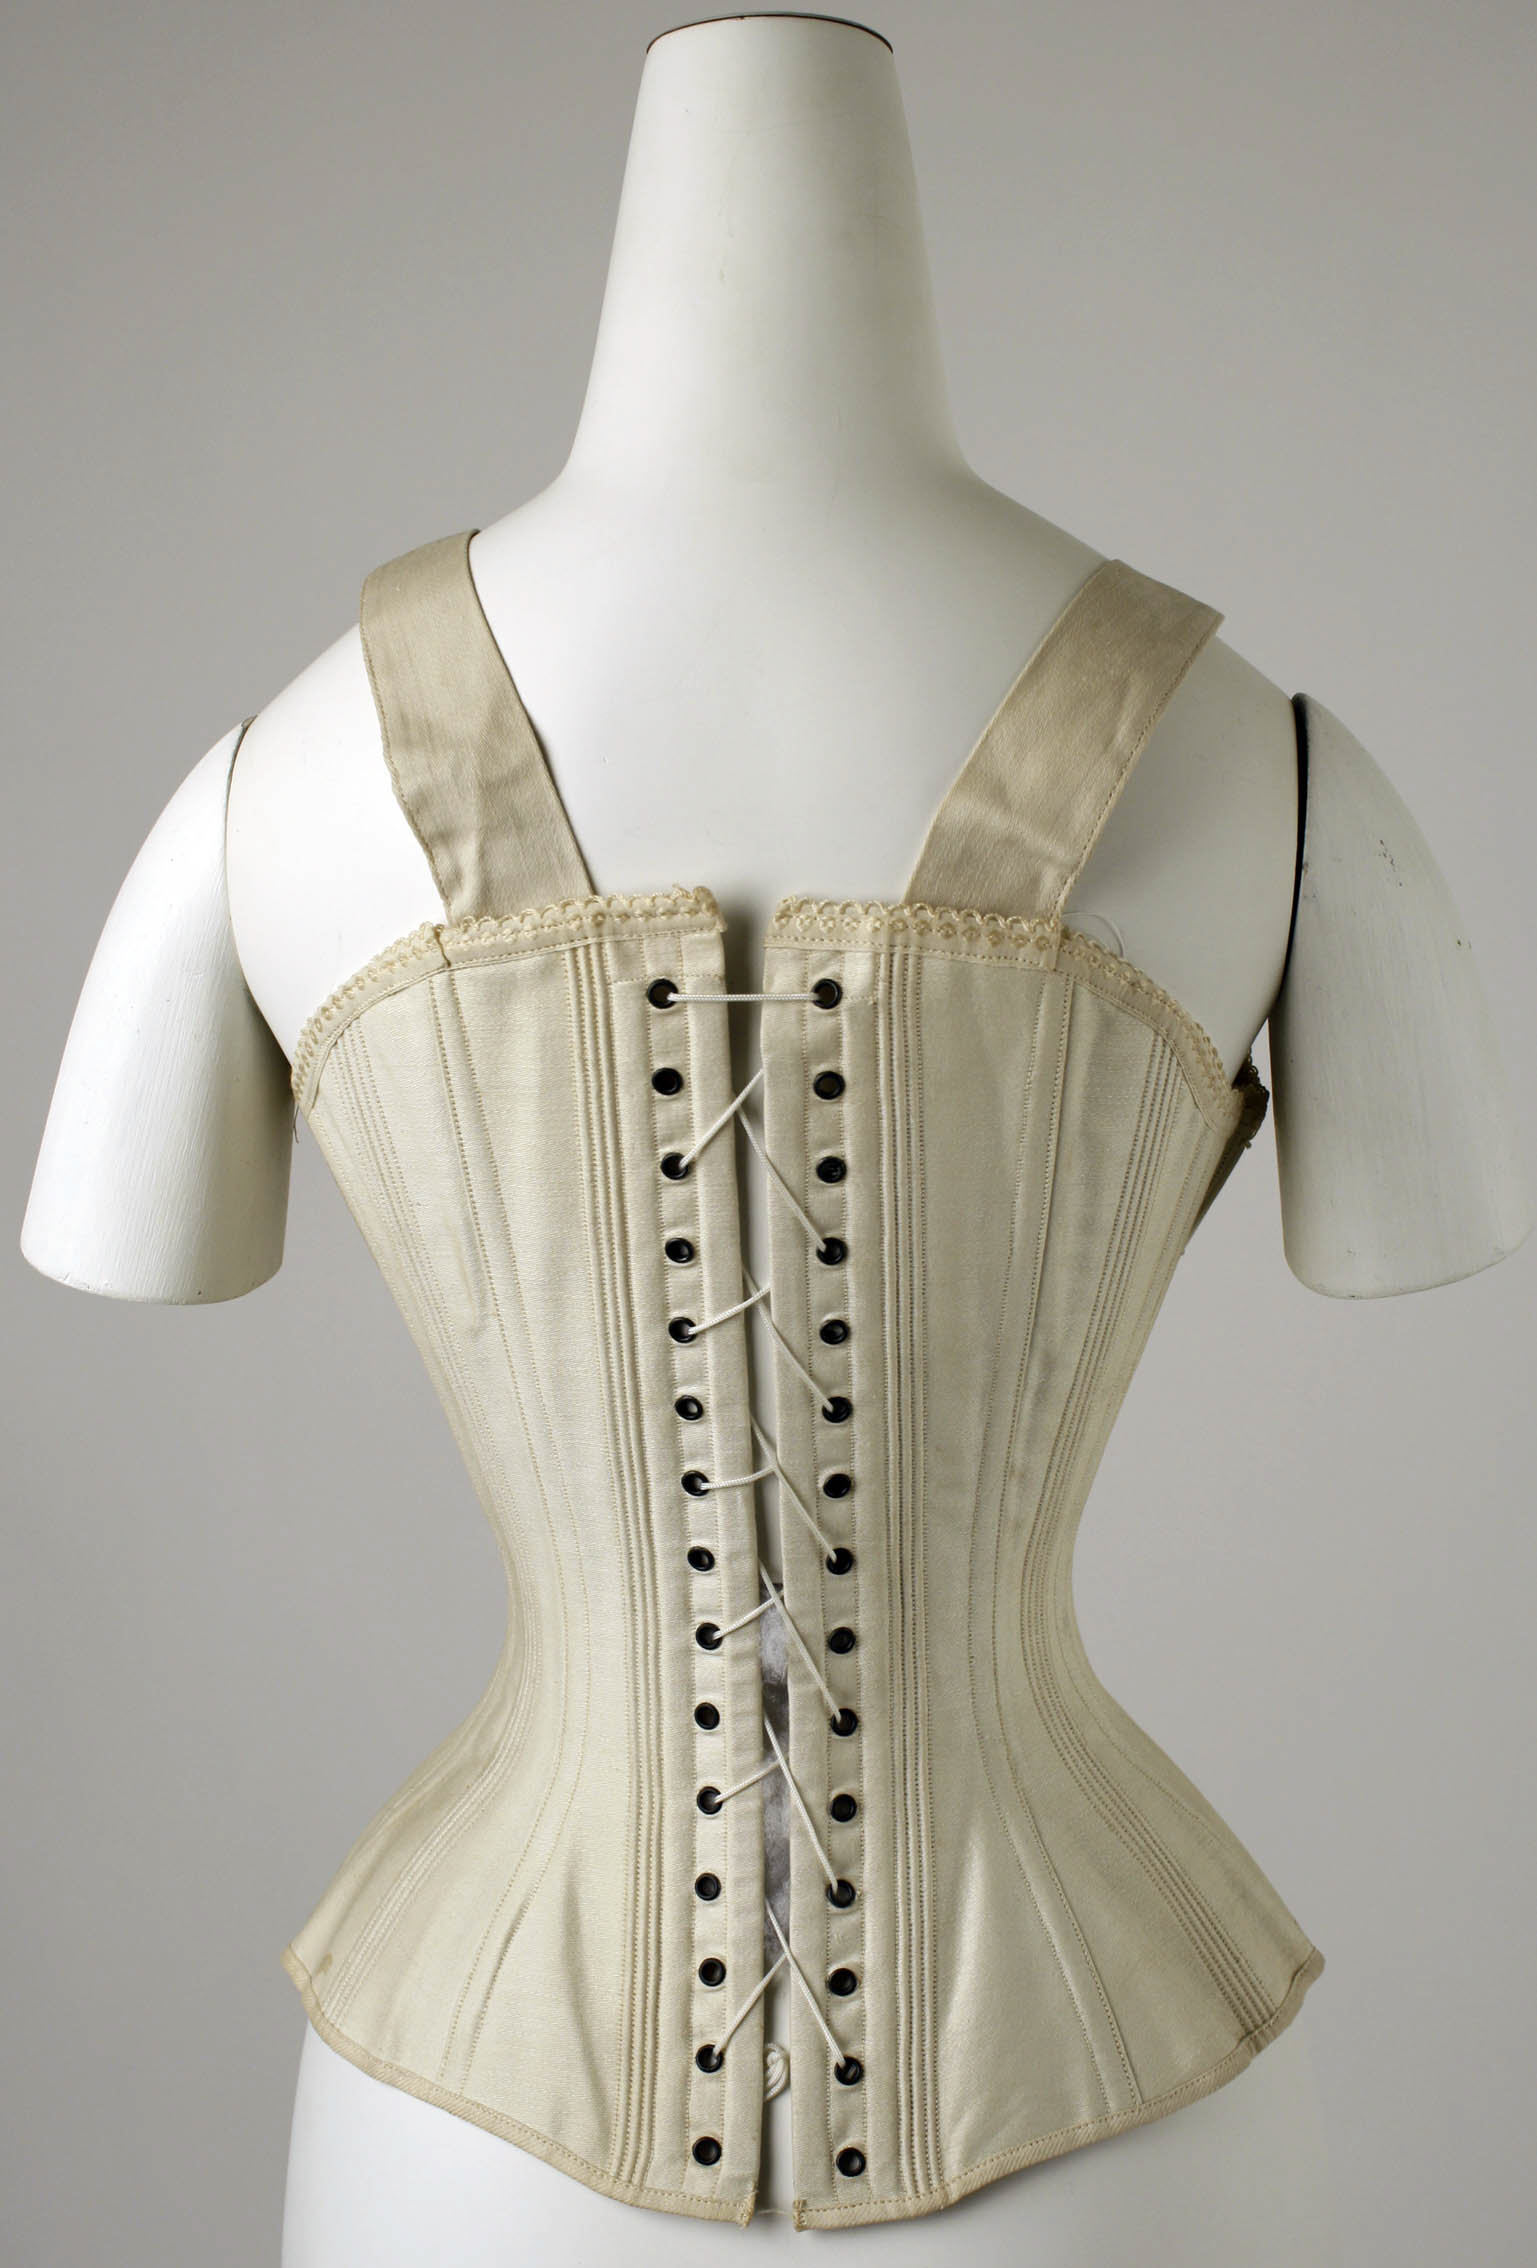 1873 Patent Corset History Fashion Invention Stock Image - Image of gown,  corset: 111403983